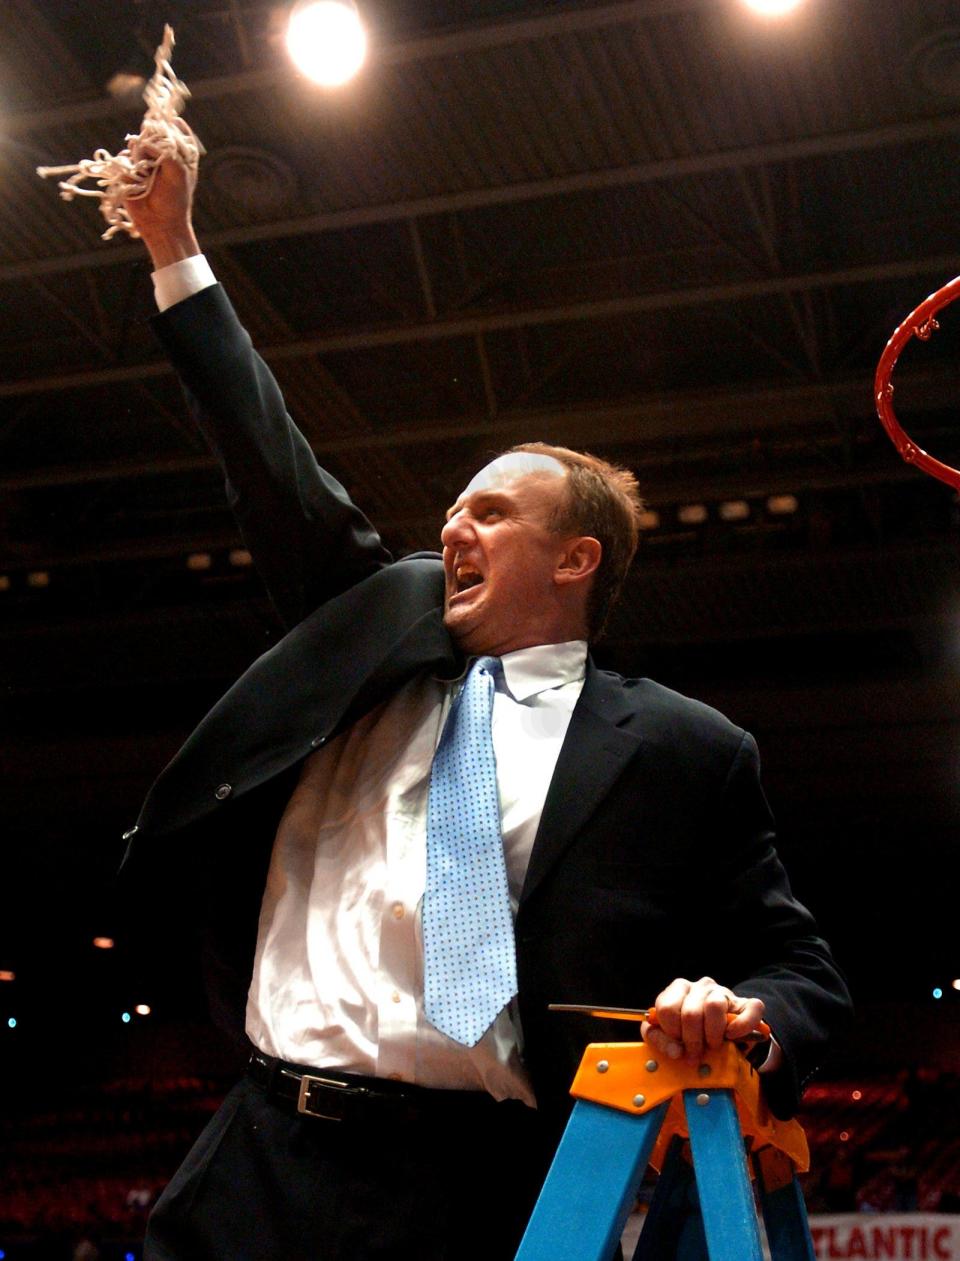 2004.0313.10.1--XAVIER WINS A10--Xavier coach Thad Matta celebrates the A-10 victory over Dayton Saturday, March 13, 2004, at the UD Arena. Photo hby CRaig Ruttle/Cincinnati Enquirer